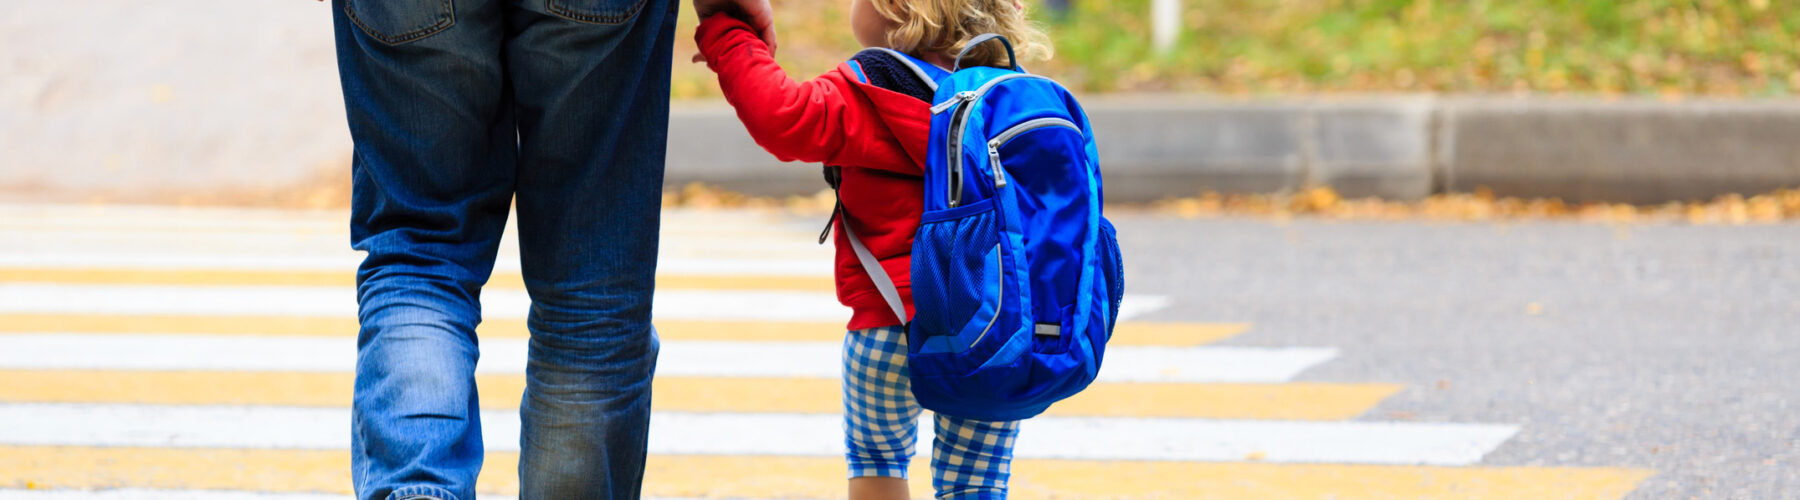 Pedestrian Mishaps & Kids- How Parents Should Deal With The Implications